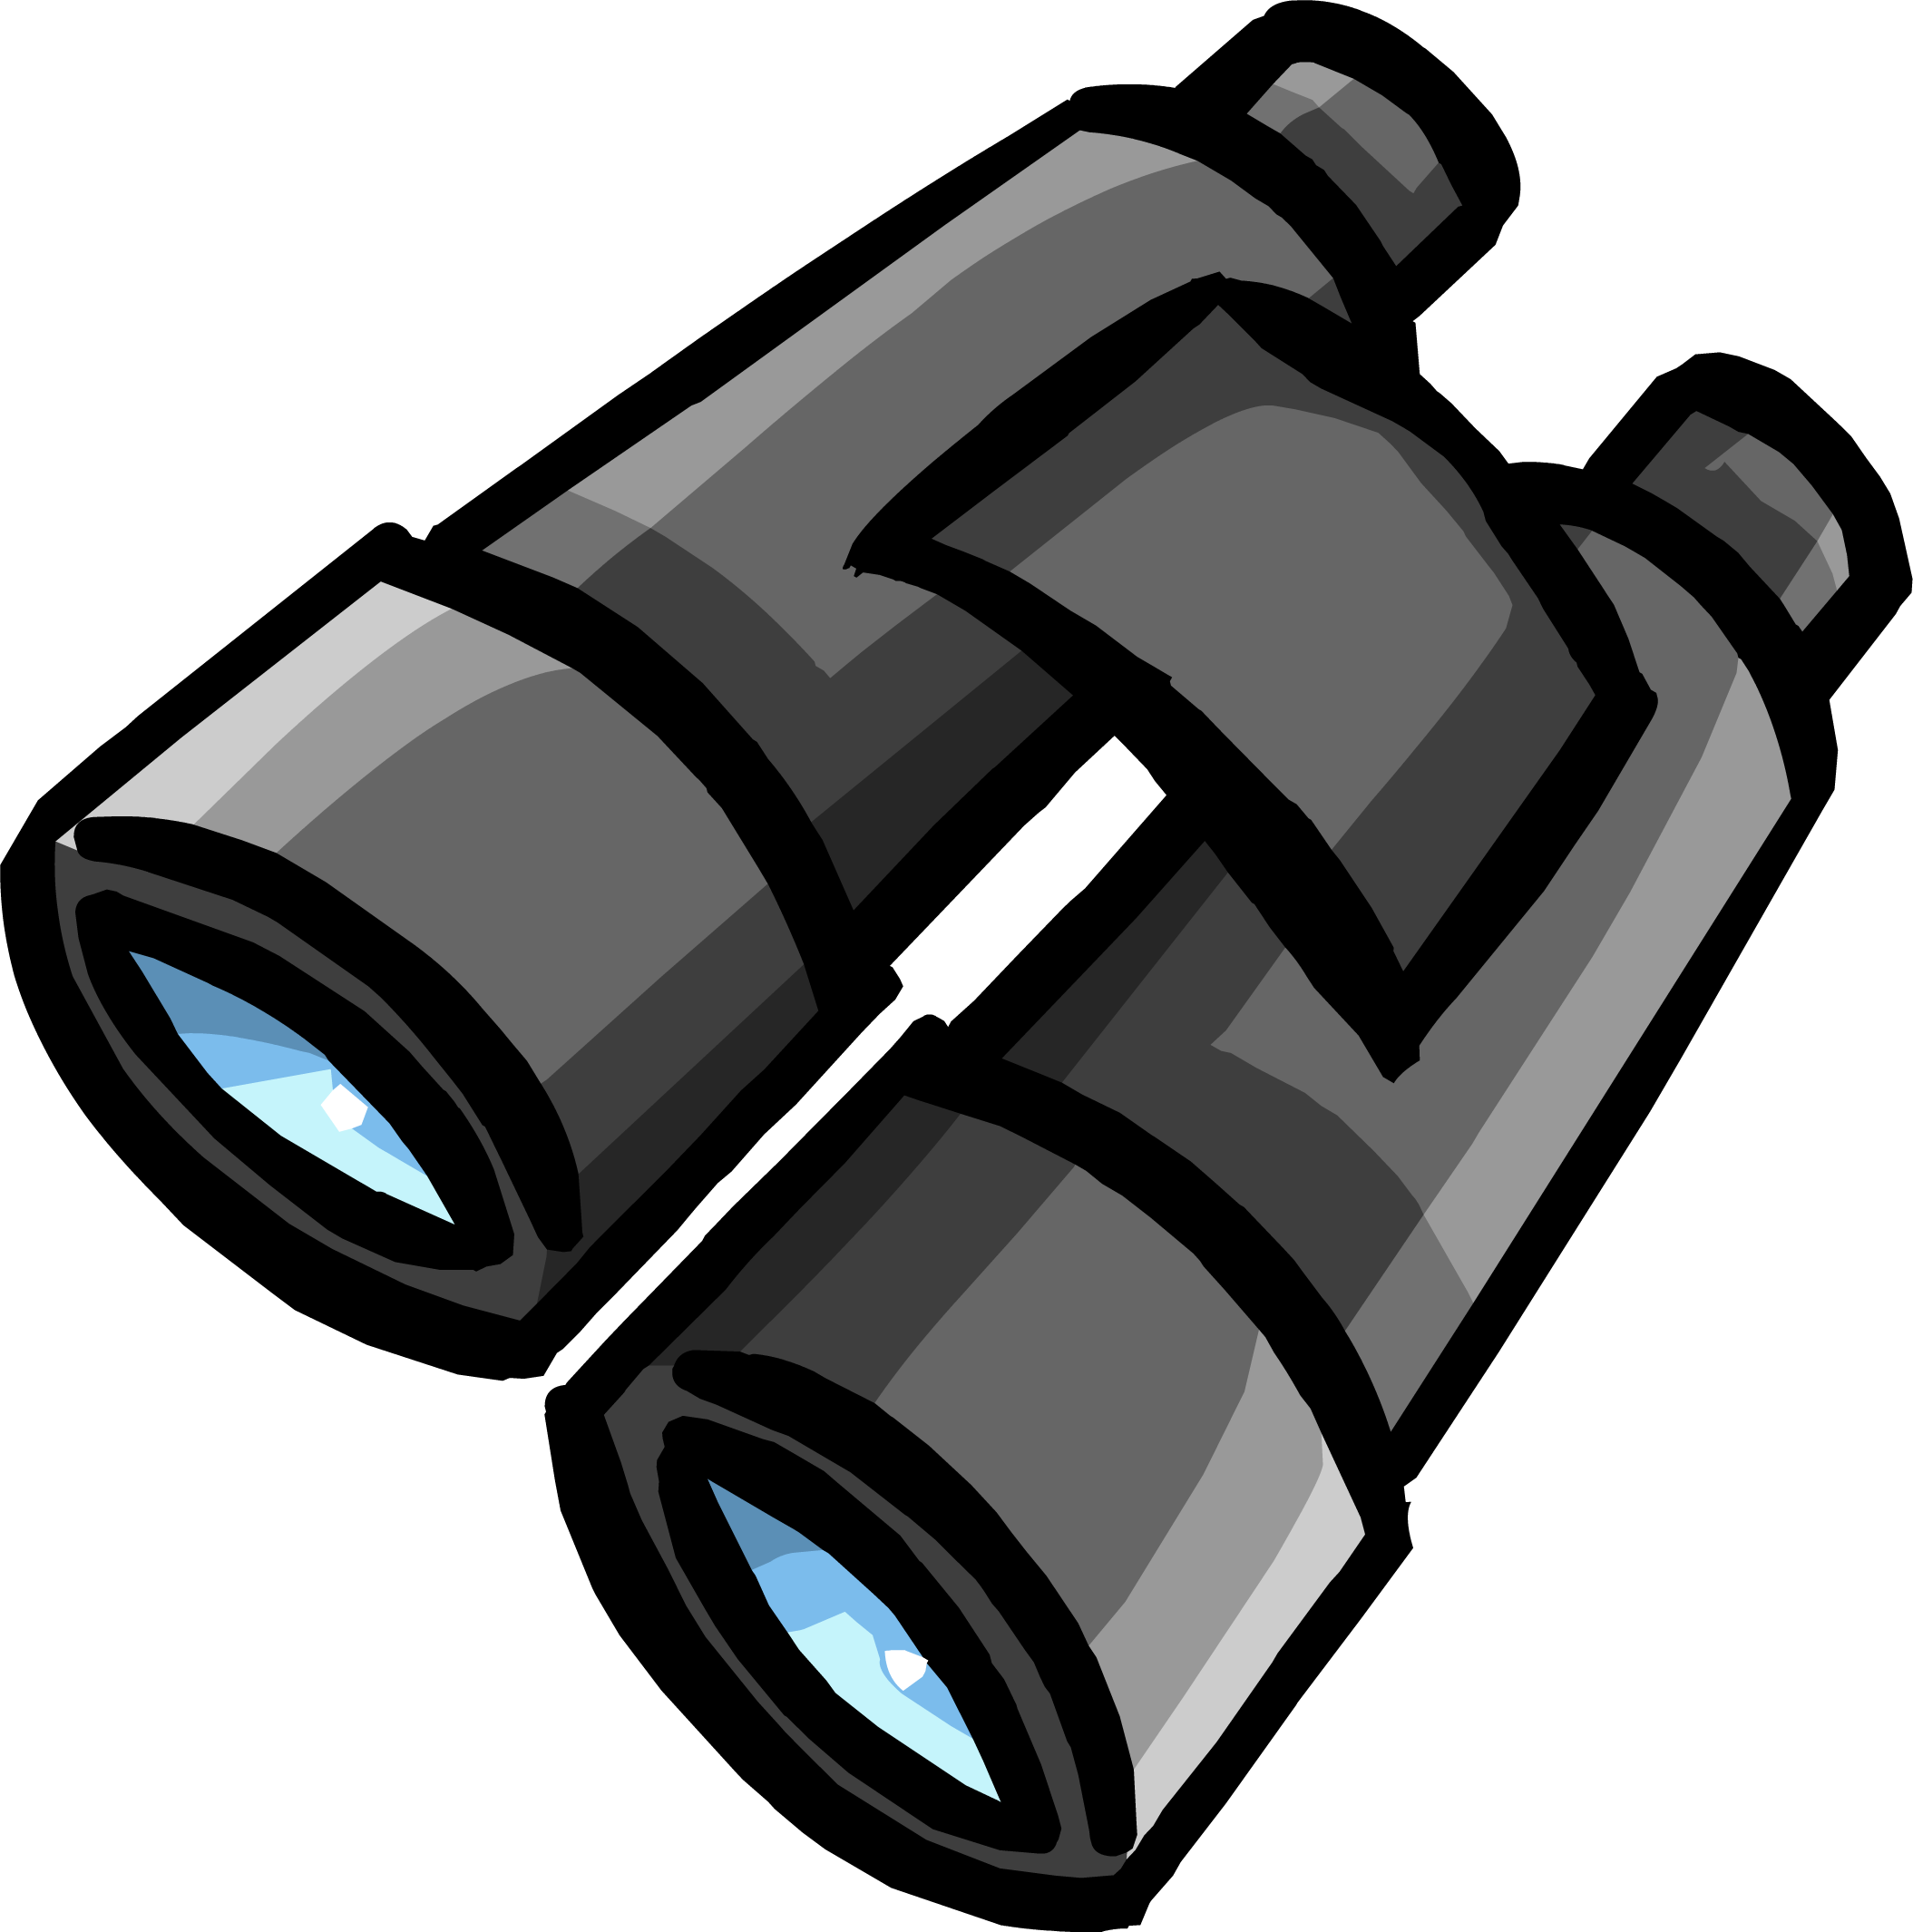 Free Binoculars Cliparts, Download Free Binoculars Cliparts png images